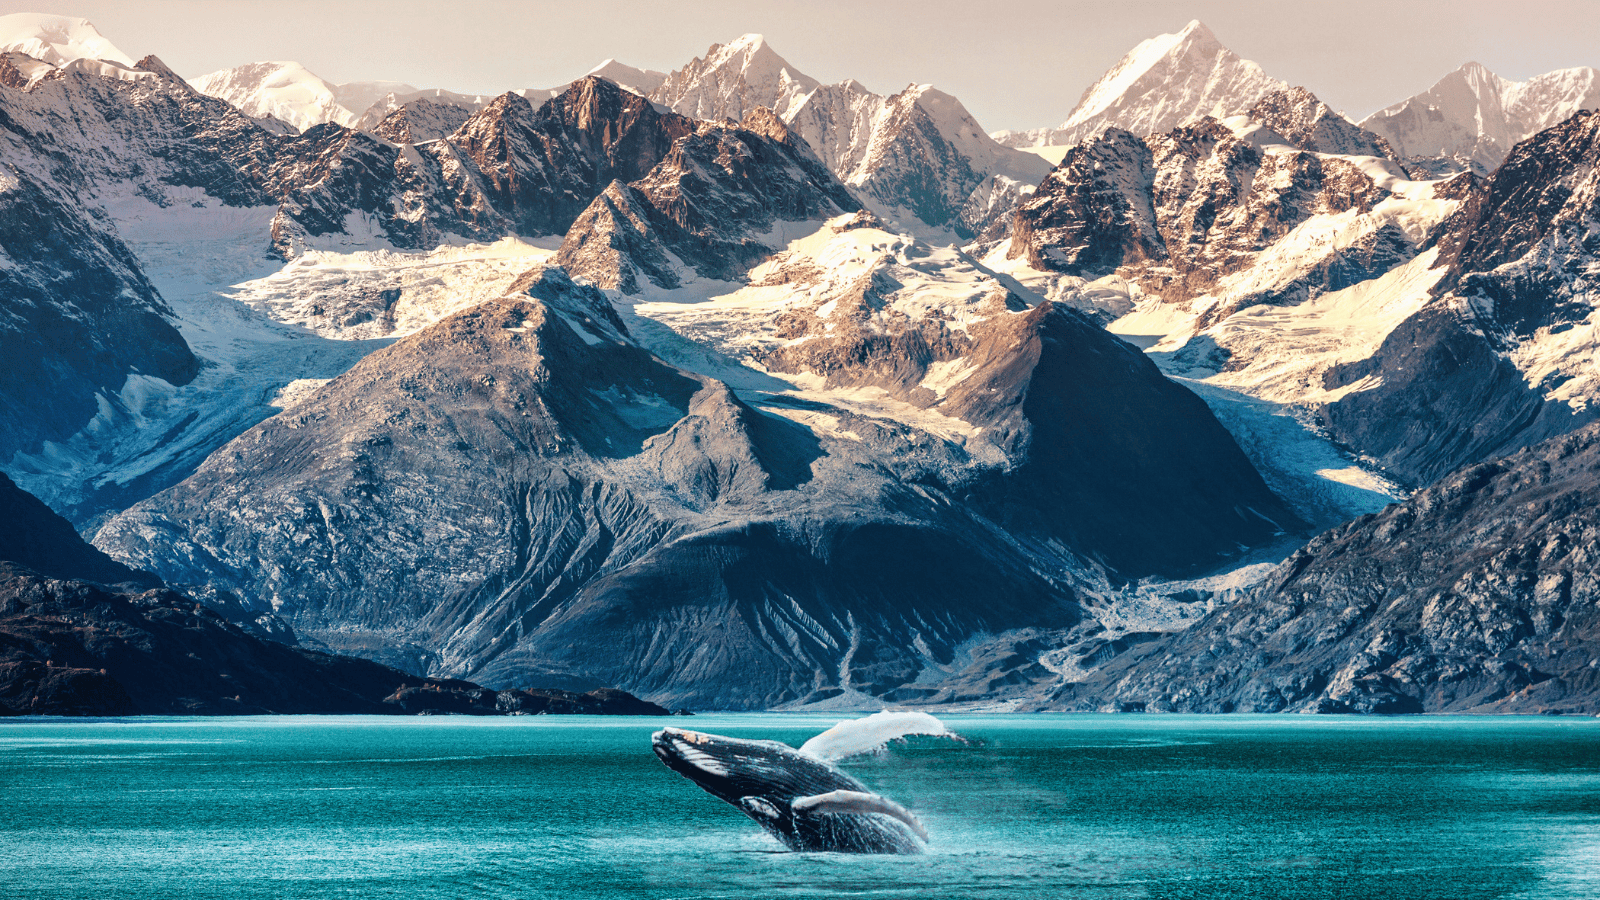 <p>Book yourself an unforgettable getaway to Alaska onboard a Vancouver-to-Vancouver <a href="https://www.crystalcruises.com/cruises/none-cse-007-240702" rel="nofollow external noopener noreferrer">Crystal Cruises</a> trip. Over eight days, cruise passengers will travel up the northern coast, with stops in Sitka, Skagway, and Ketchikan. Crystal specializes in top-notch service, providing all you need for an exceptional vacation. </p>